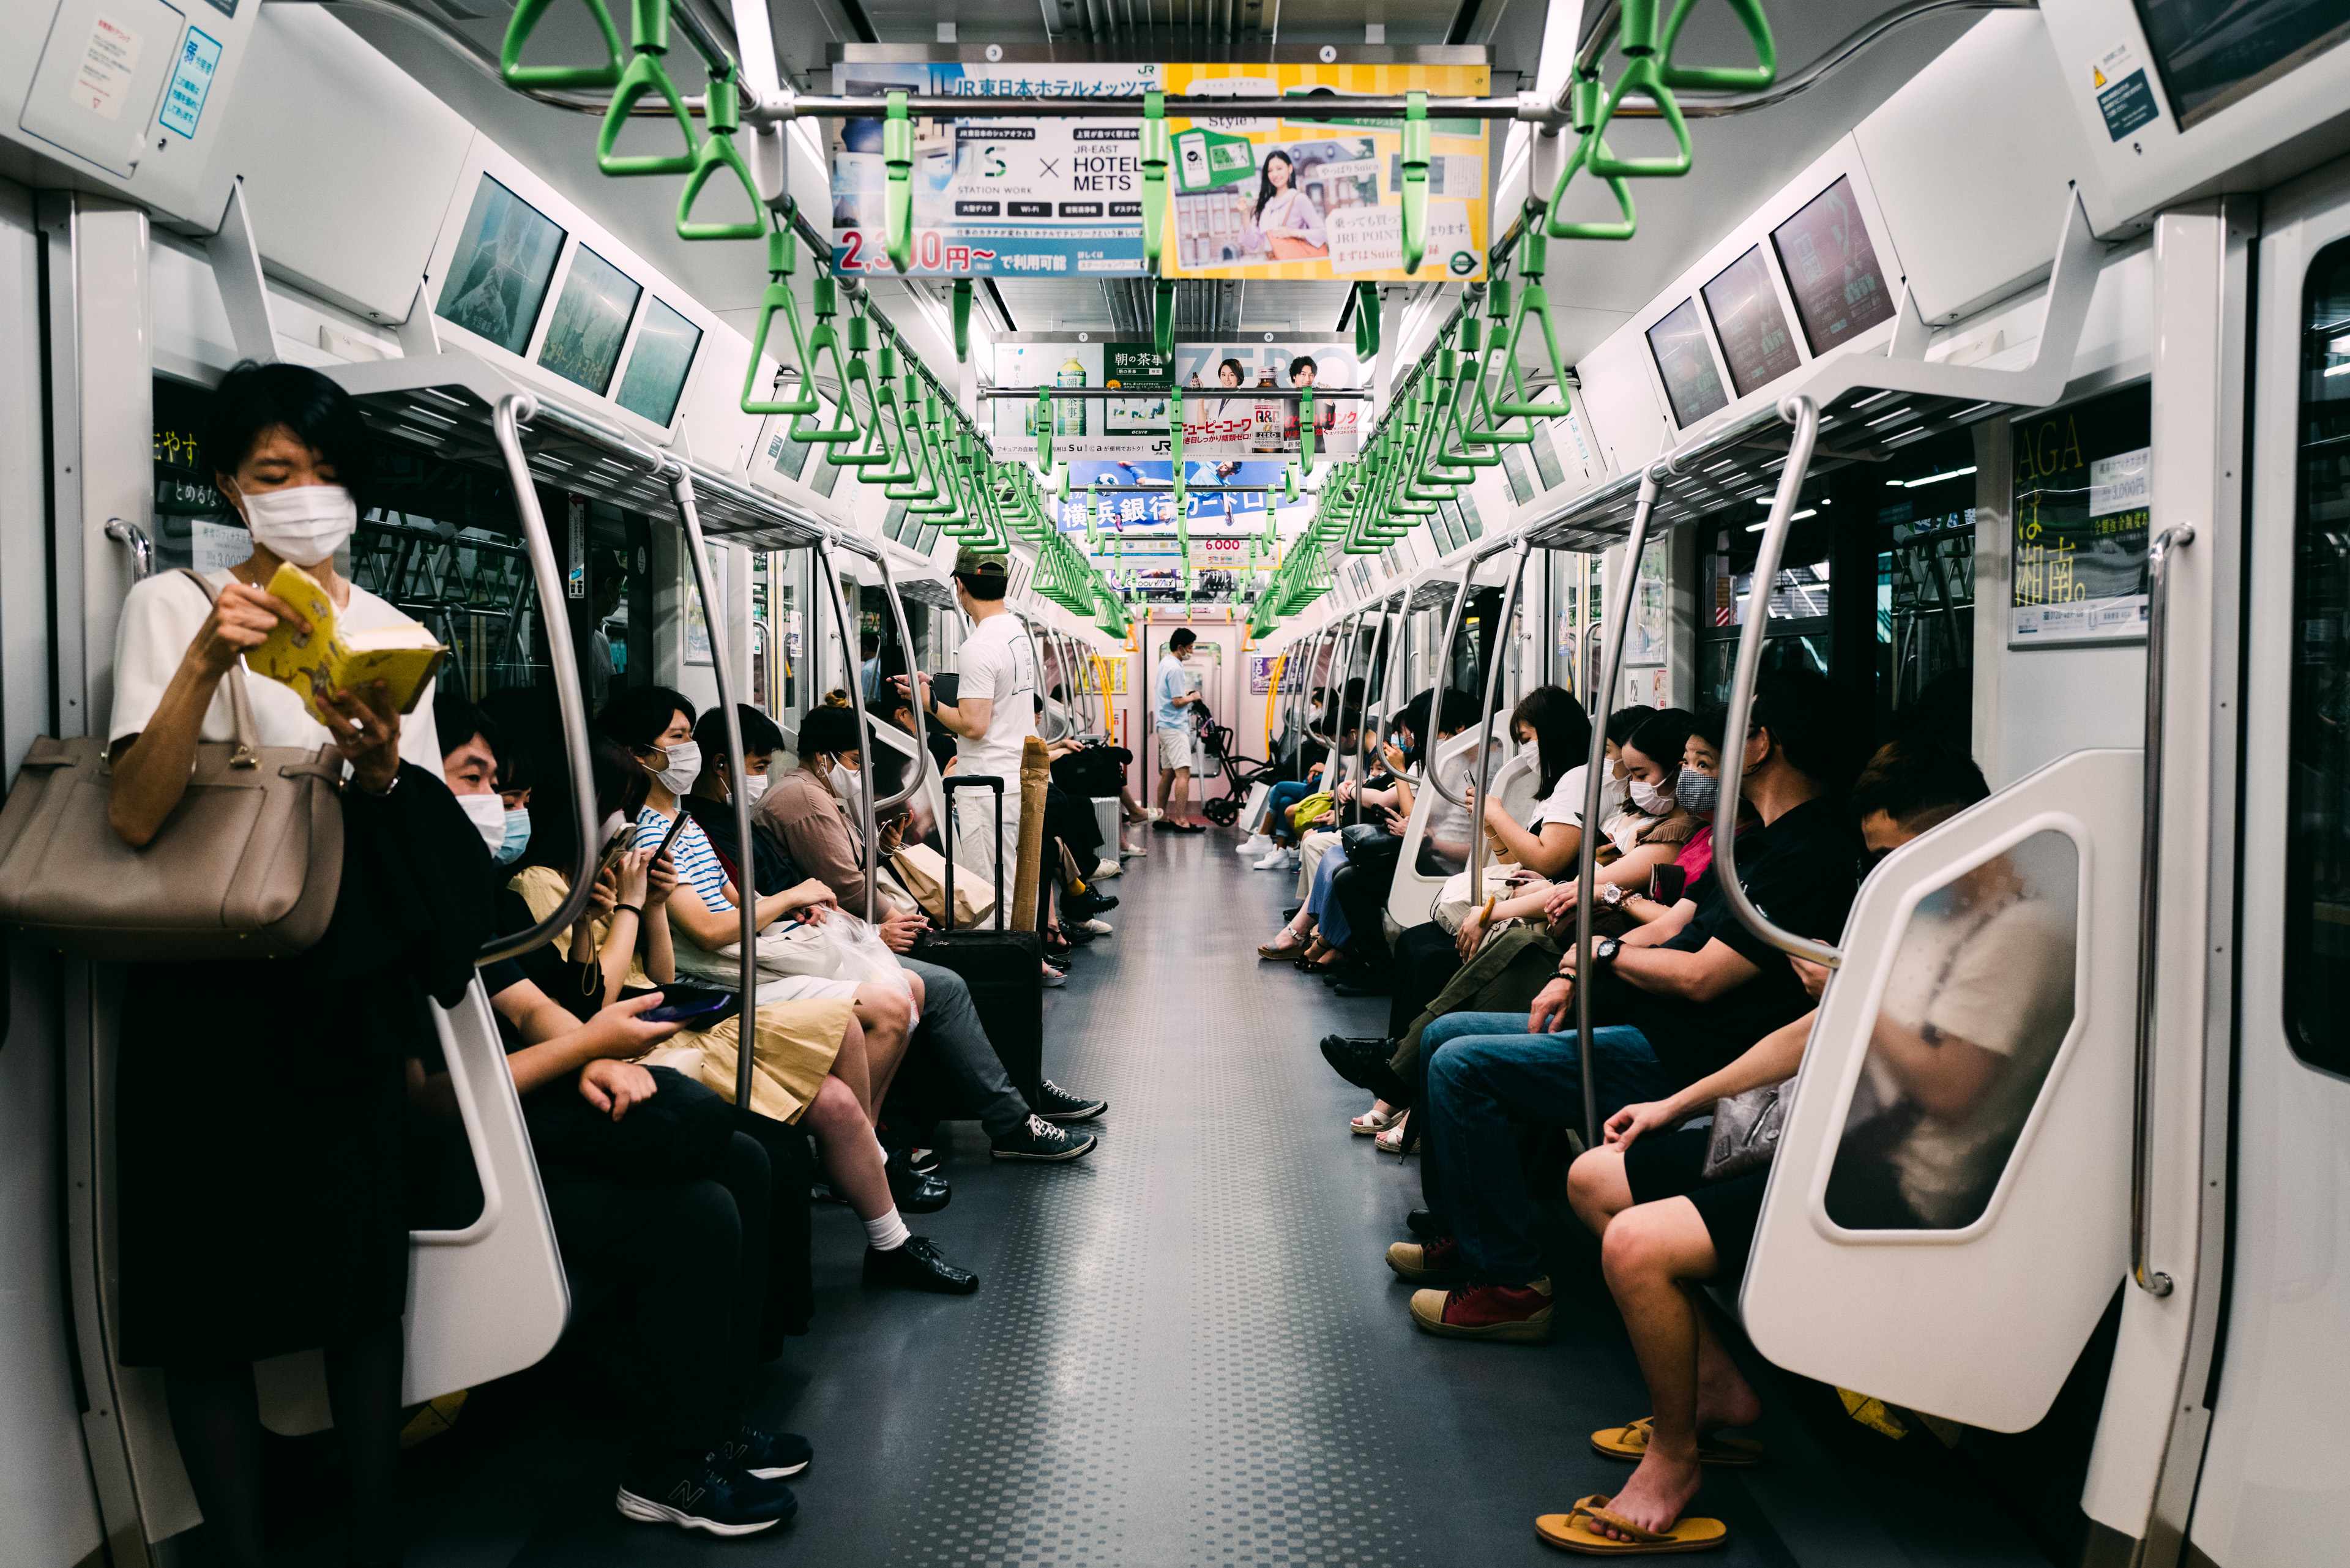 Inside a train on the Tokyo Metro.